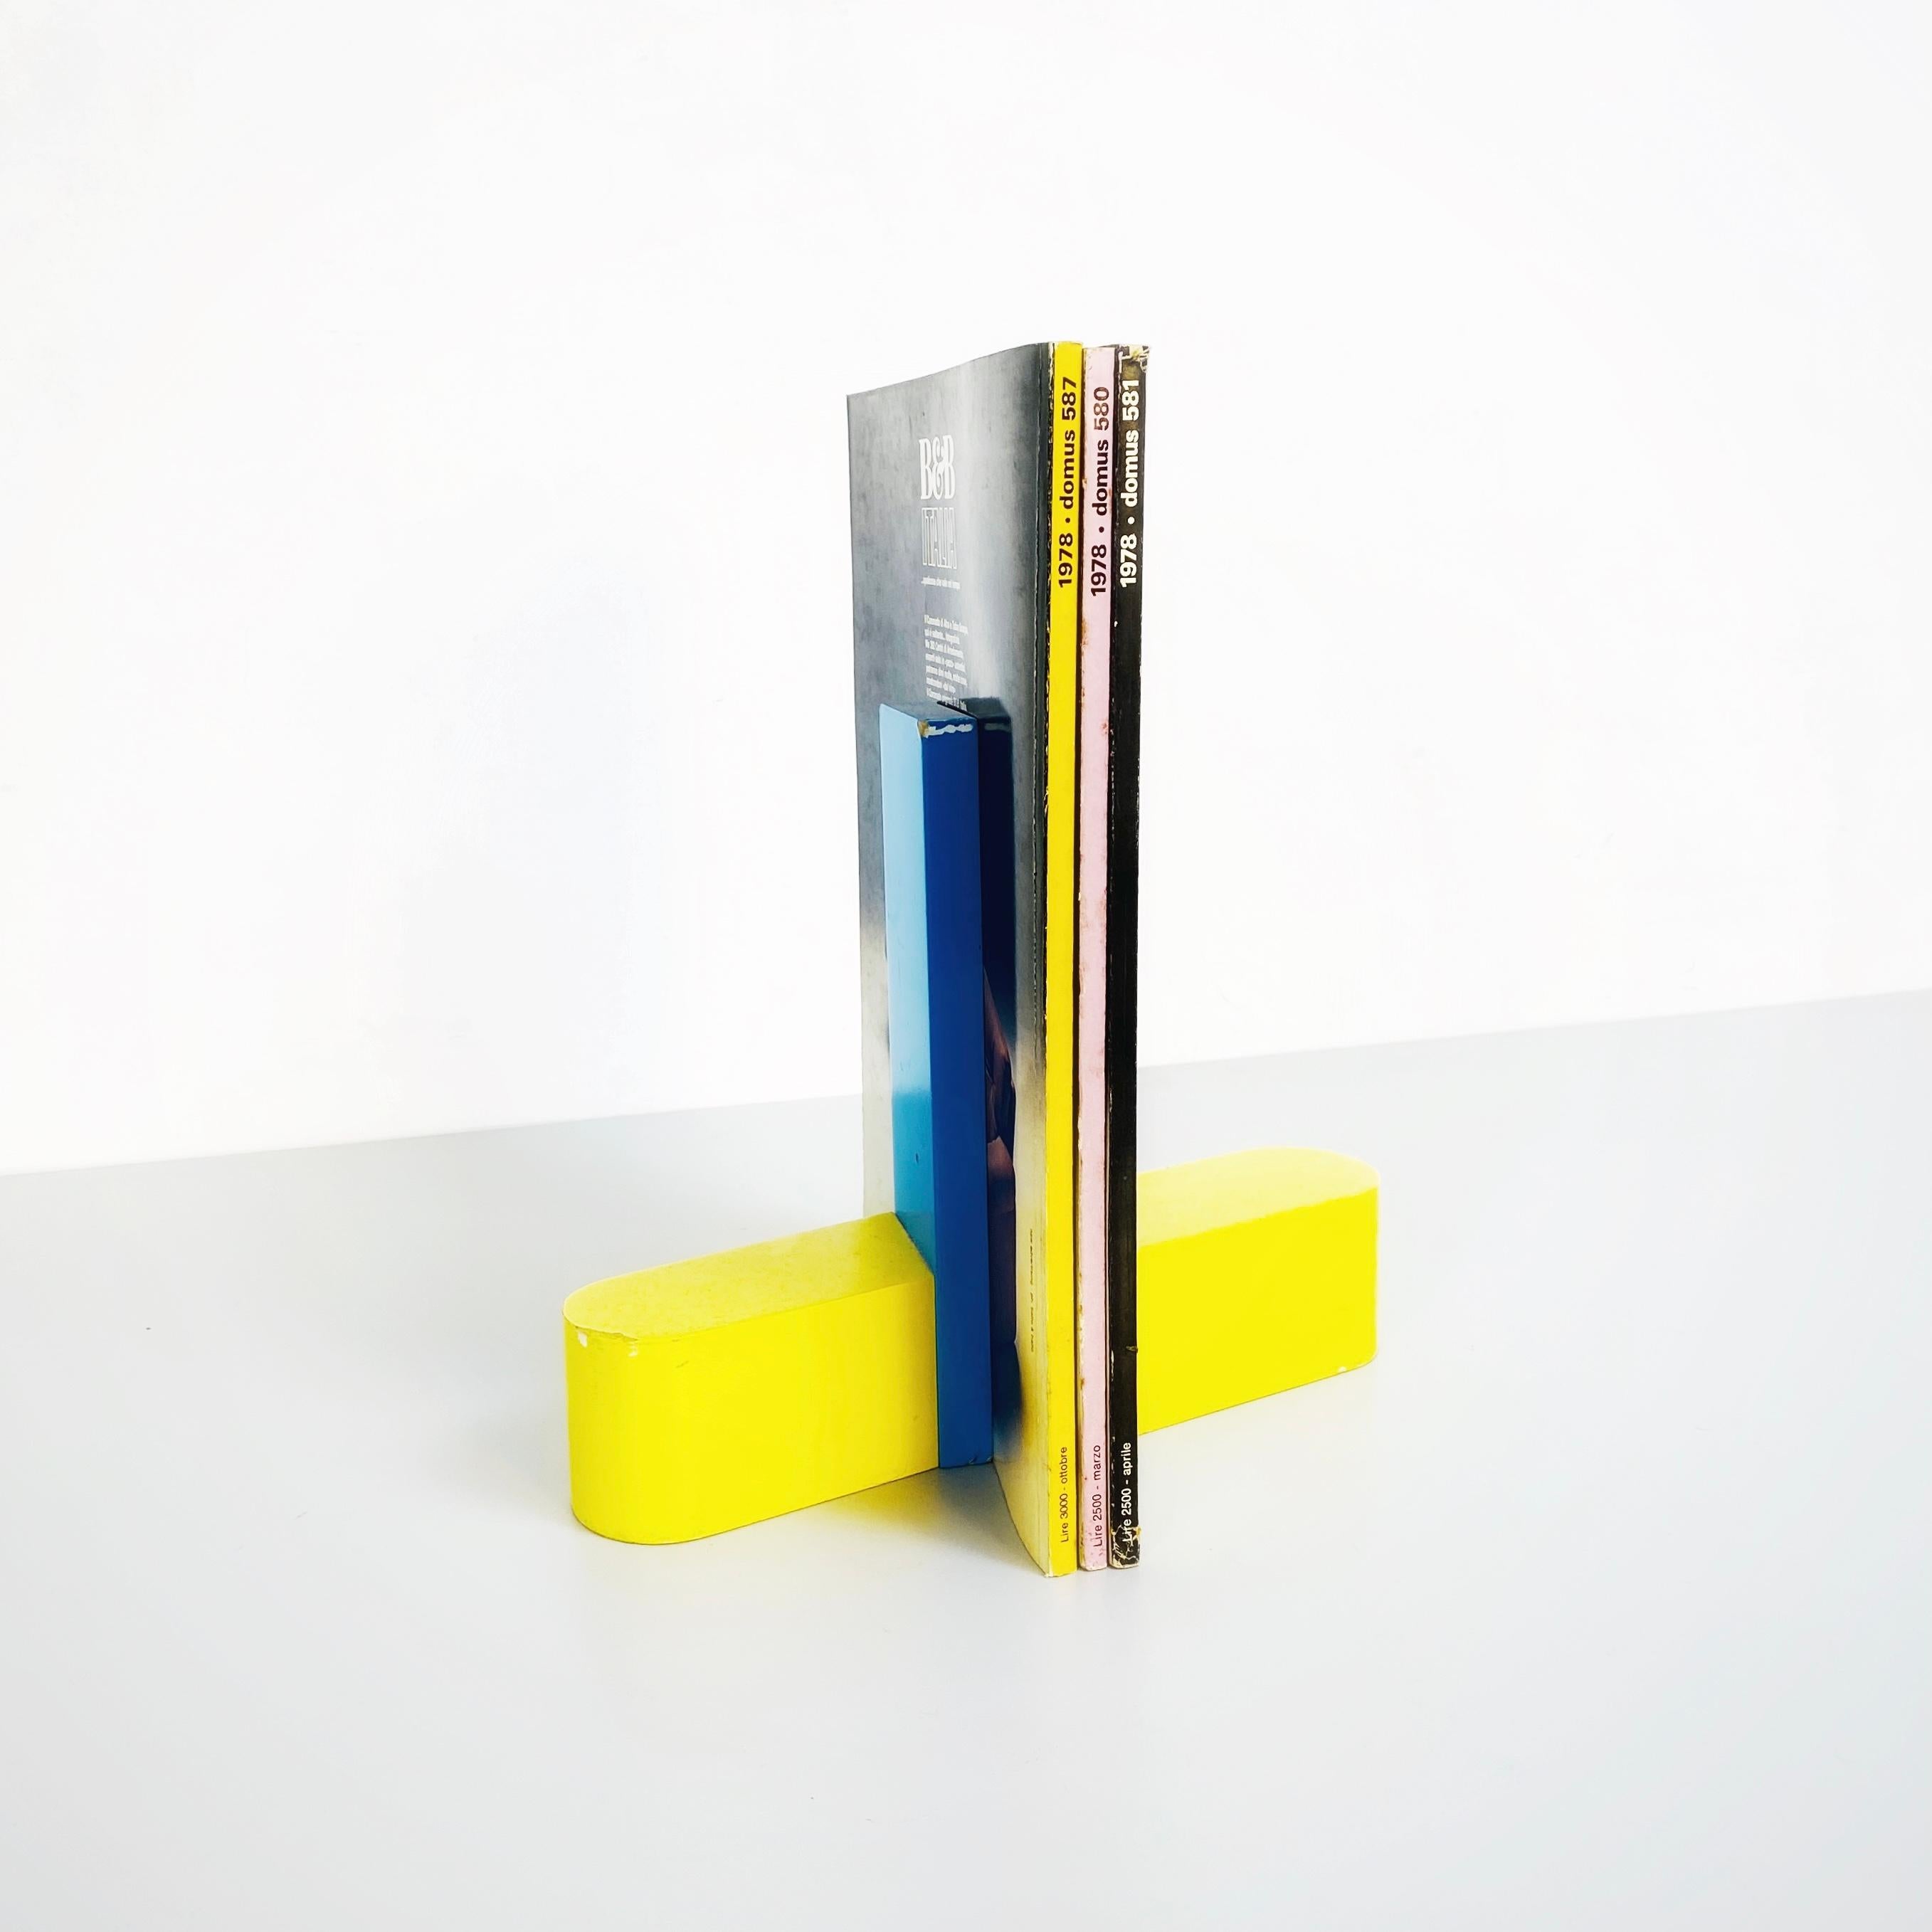 Mid-20th Century Italian Mid-Century Modern Yellow and Blue Wooden Bookends, 1960s